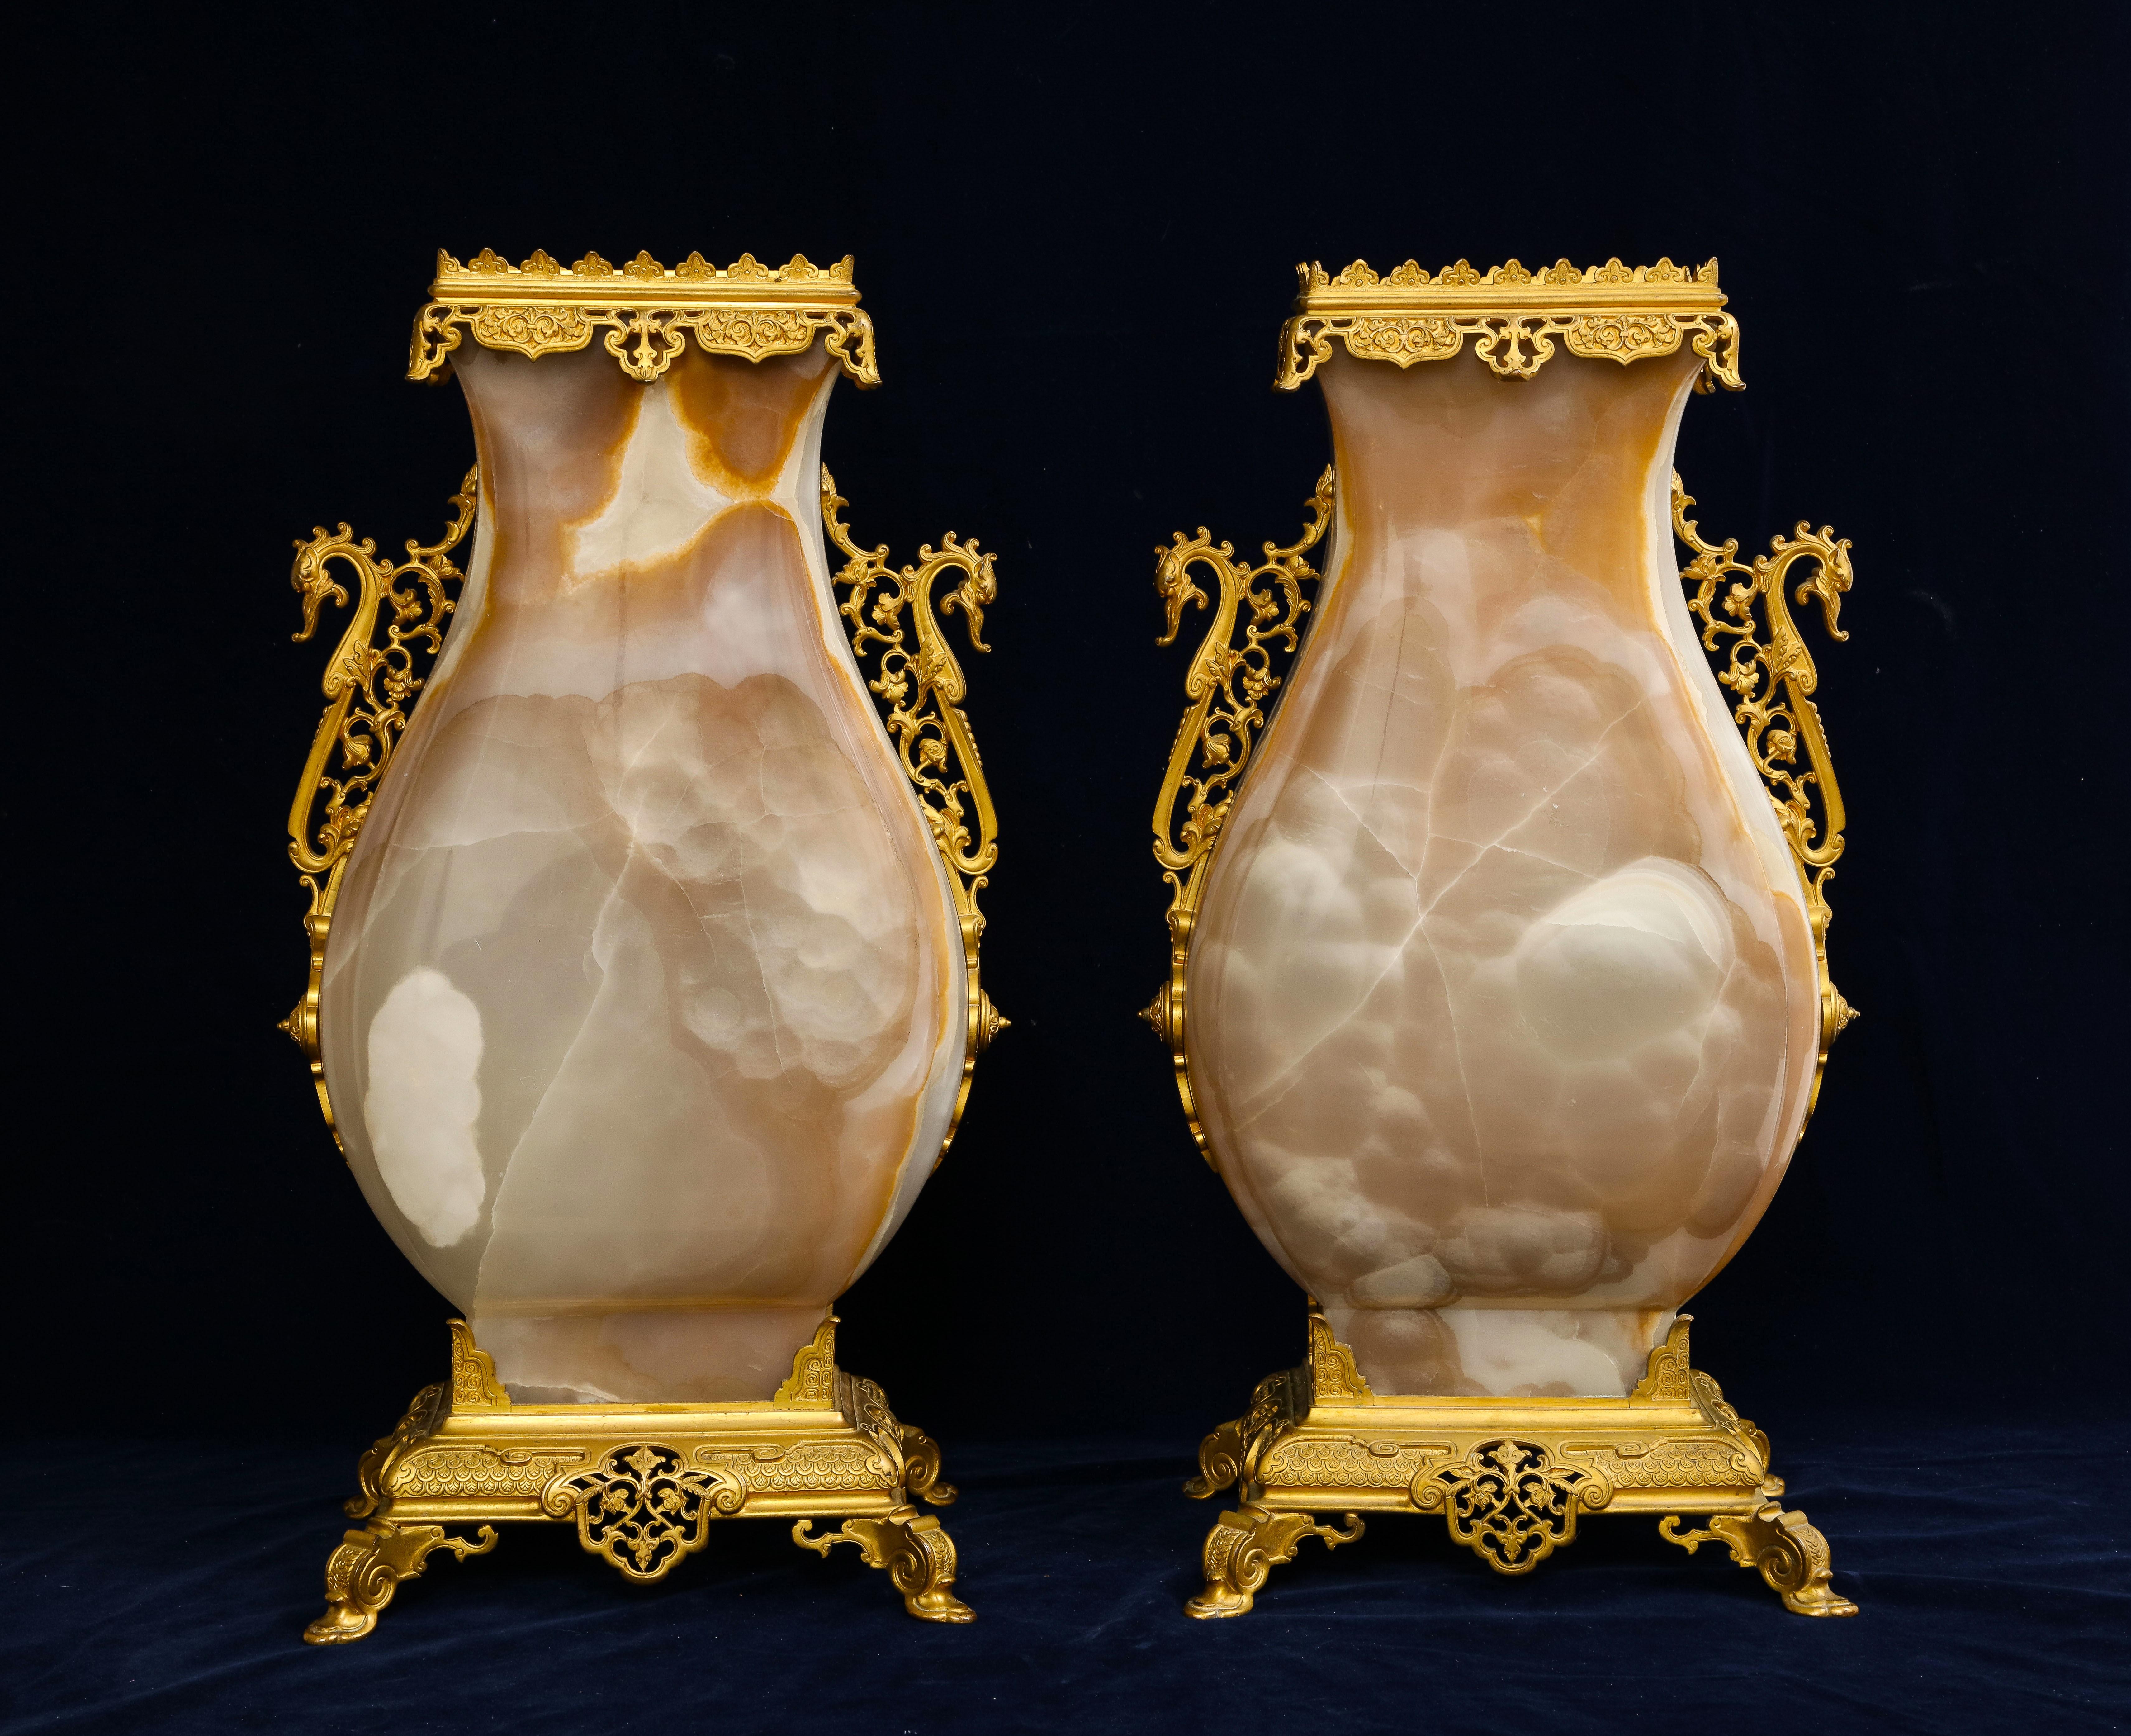 A very large pair of 19th Century French Louis XVI Style Ormolu Mounted Carved Agate Vases, Attributed to Édouard Lièvre. Each vase is massive with a large-scale hand-carved and hand-polished agate body which is mounted with wonderful ormolu mounts.